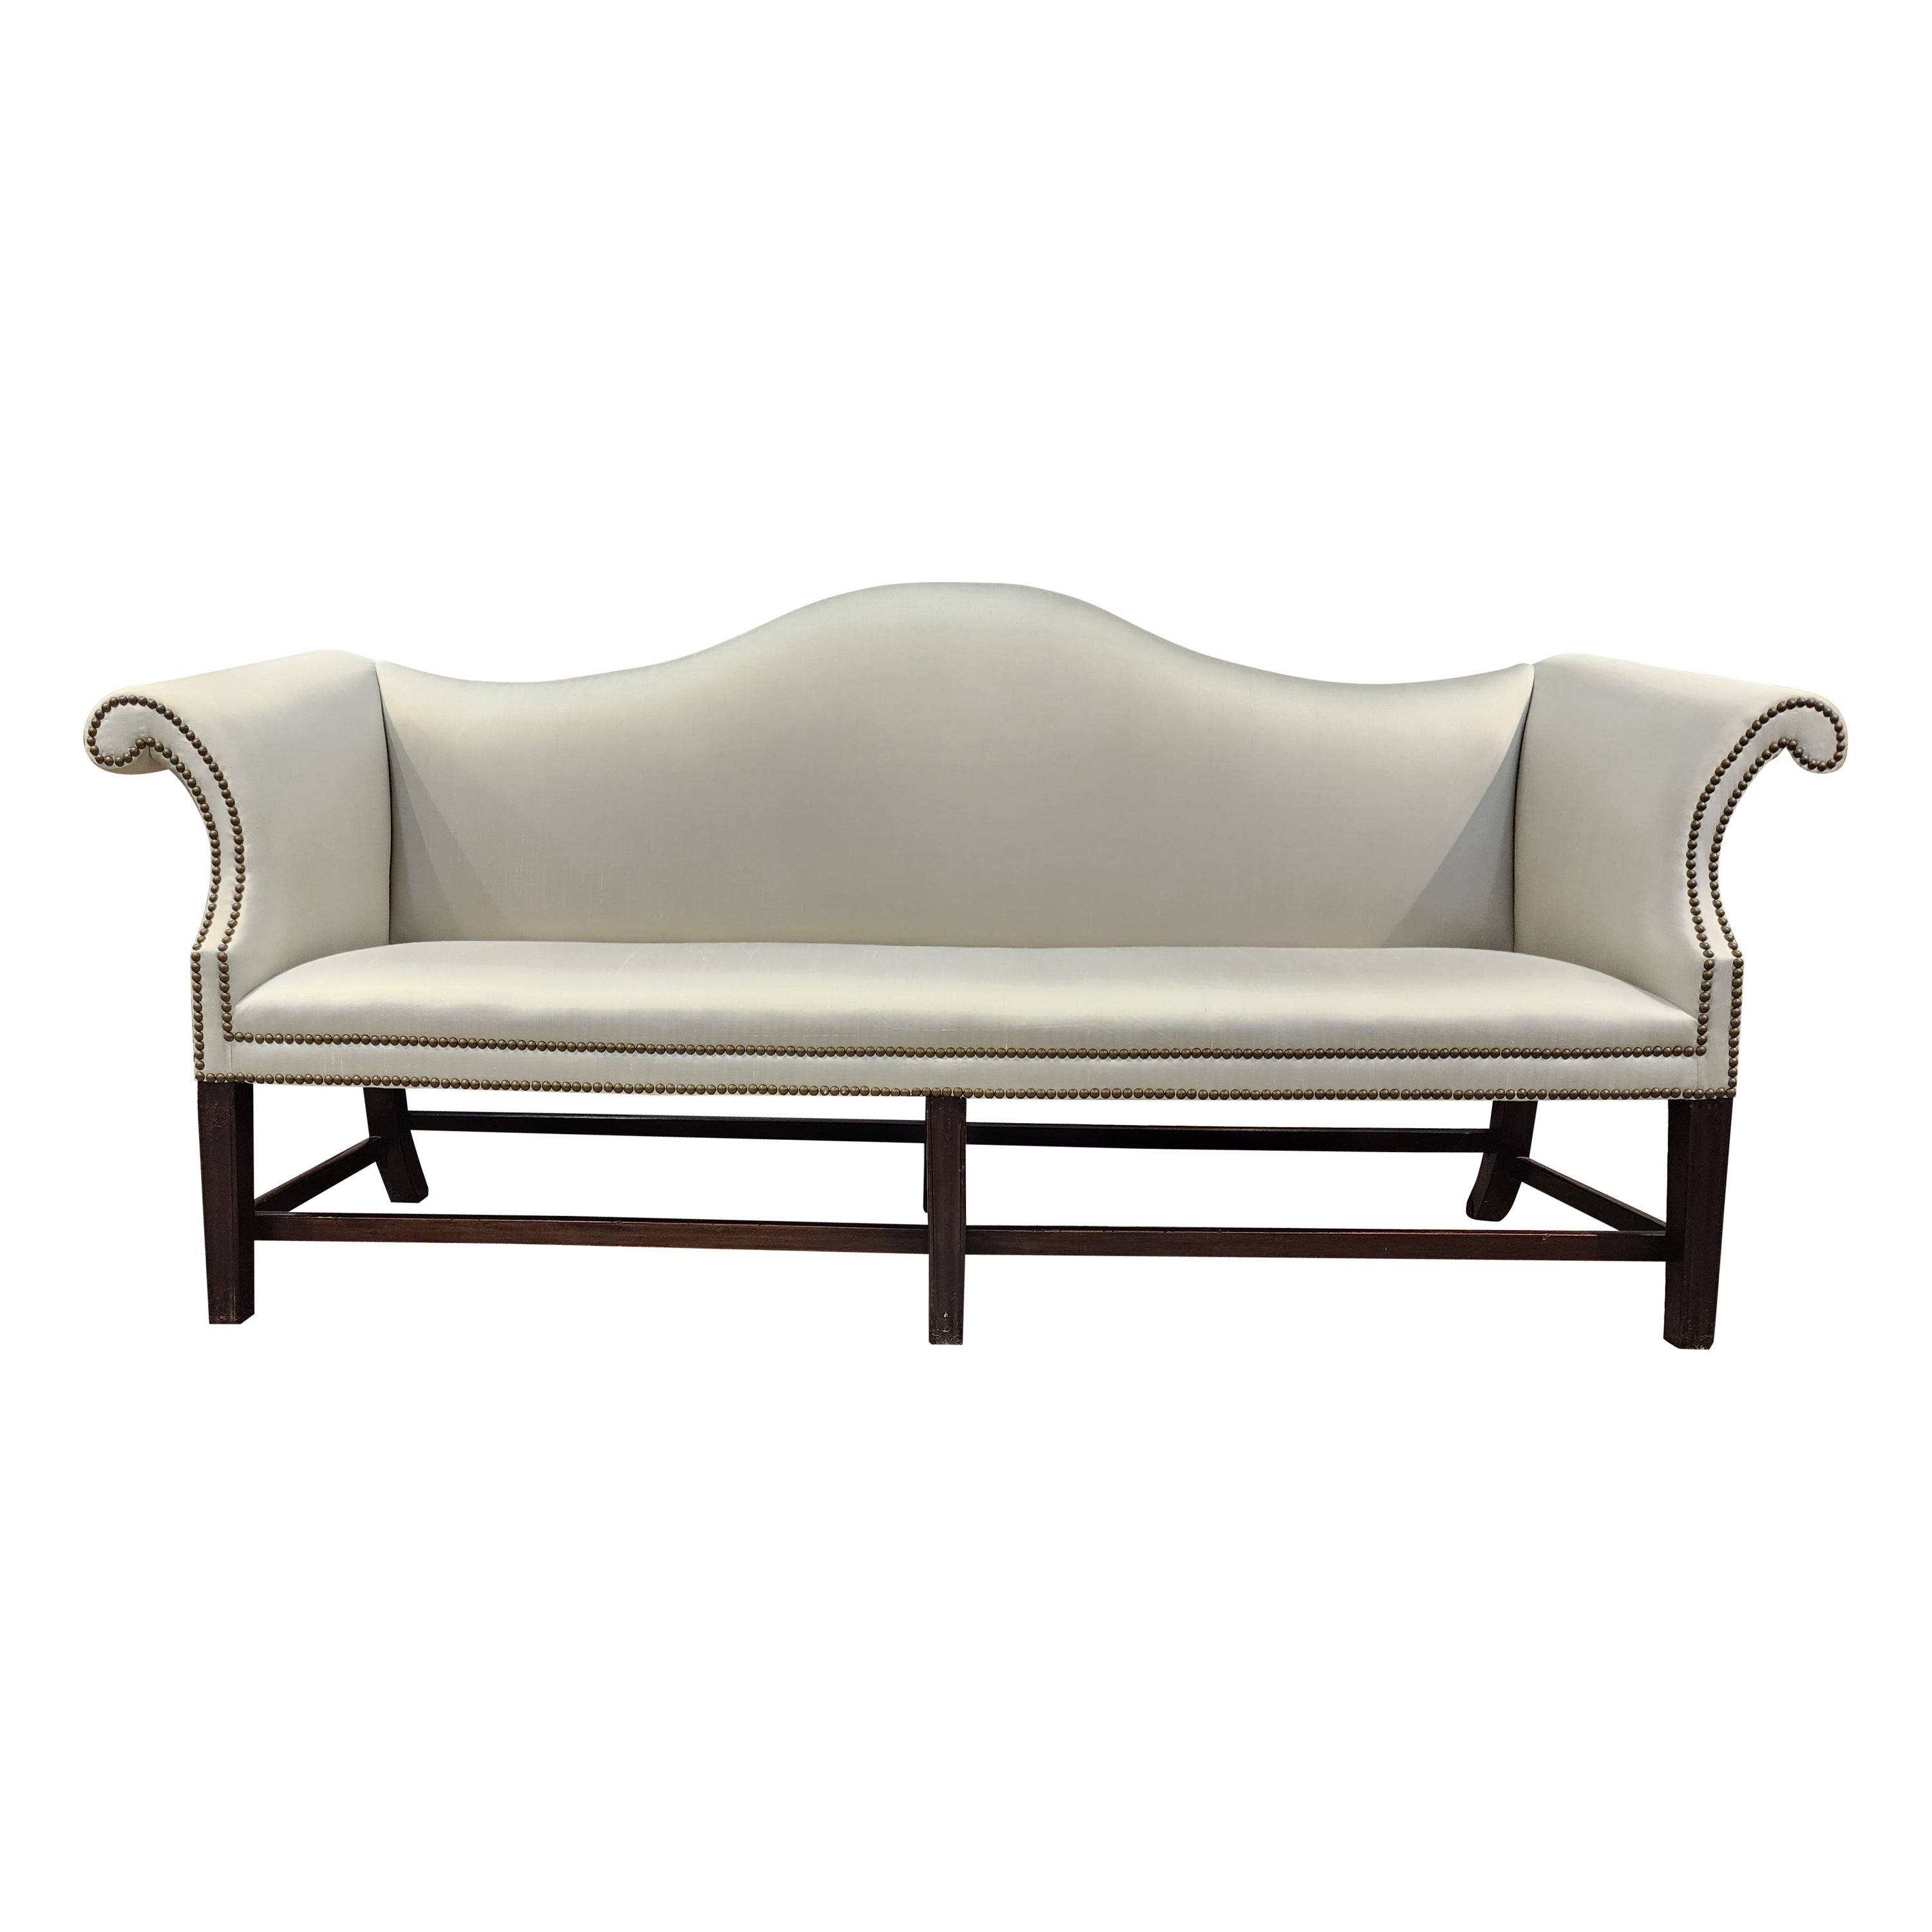 18th century Chippendale mahogany camelback sofa with scrolled arms, molded tapered legs and bowed front. This example has dynamic impact due to its super lines. The bowed front seat frame adds to its fluidity. 
This item is currently newly